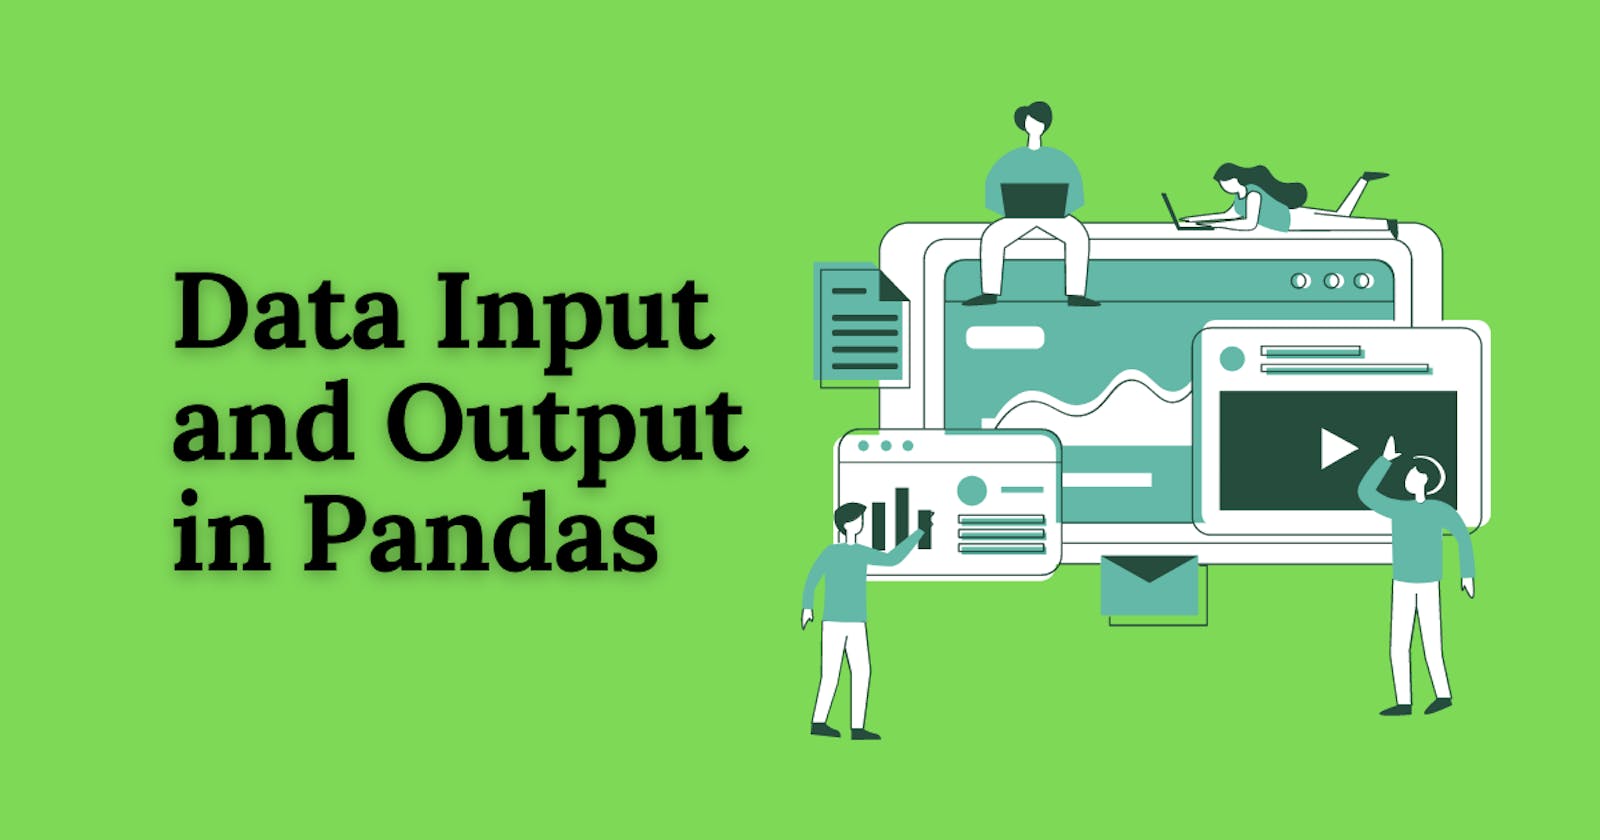 #5 -> Data Input and Output in Pandas